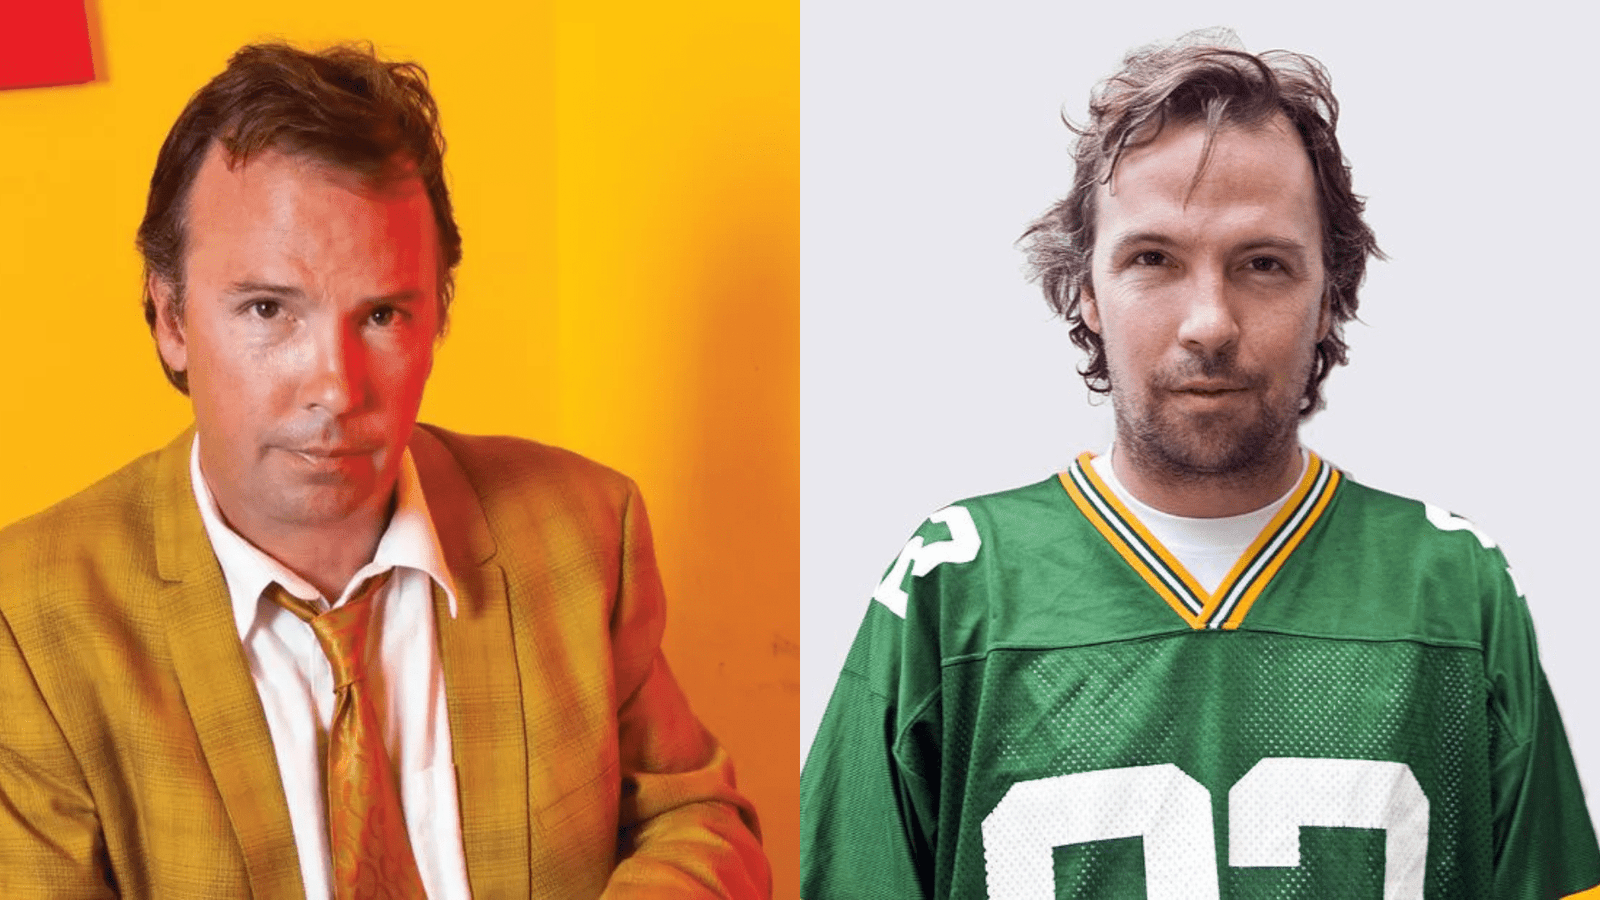 Doug Stanhope Net Worth – Comedian, Podcaster, and Author